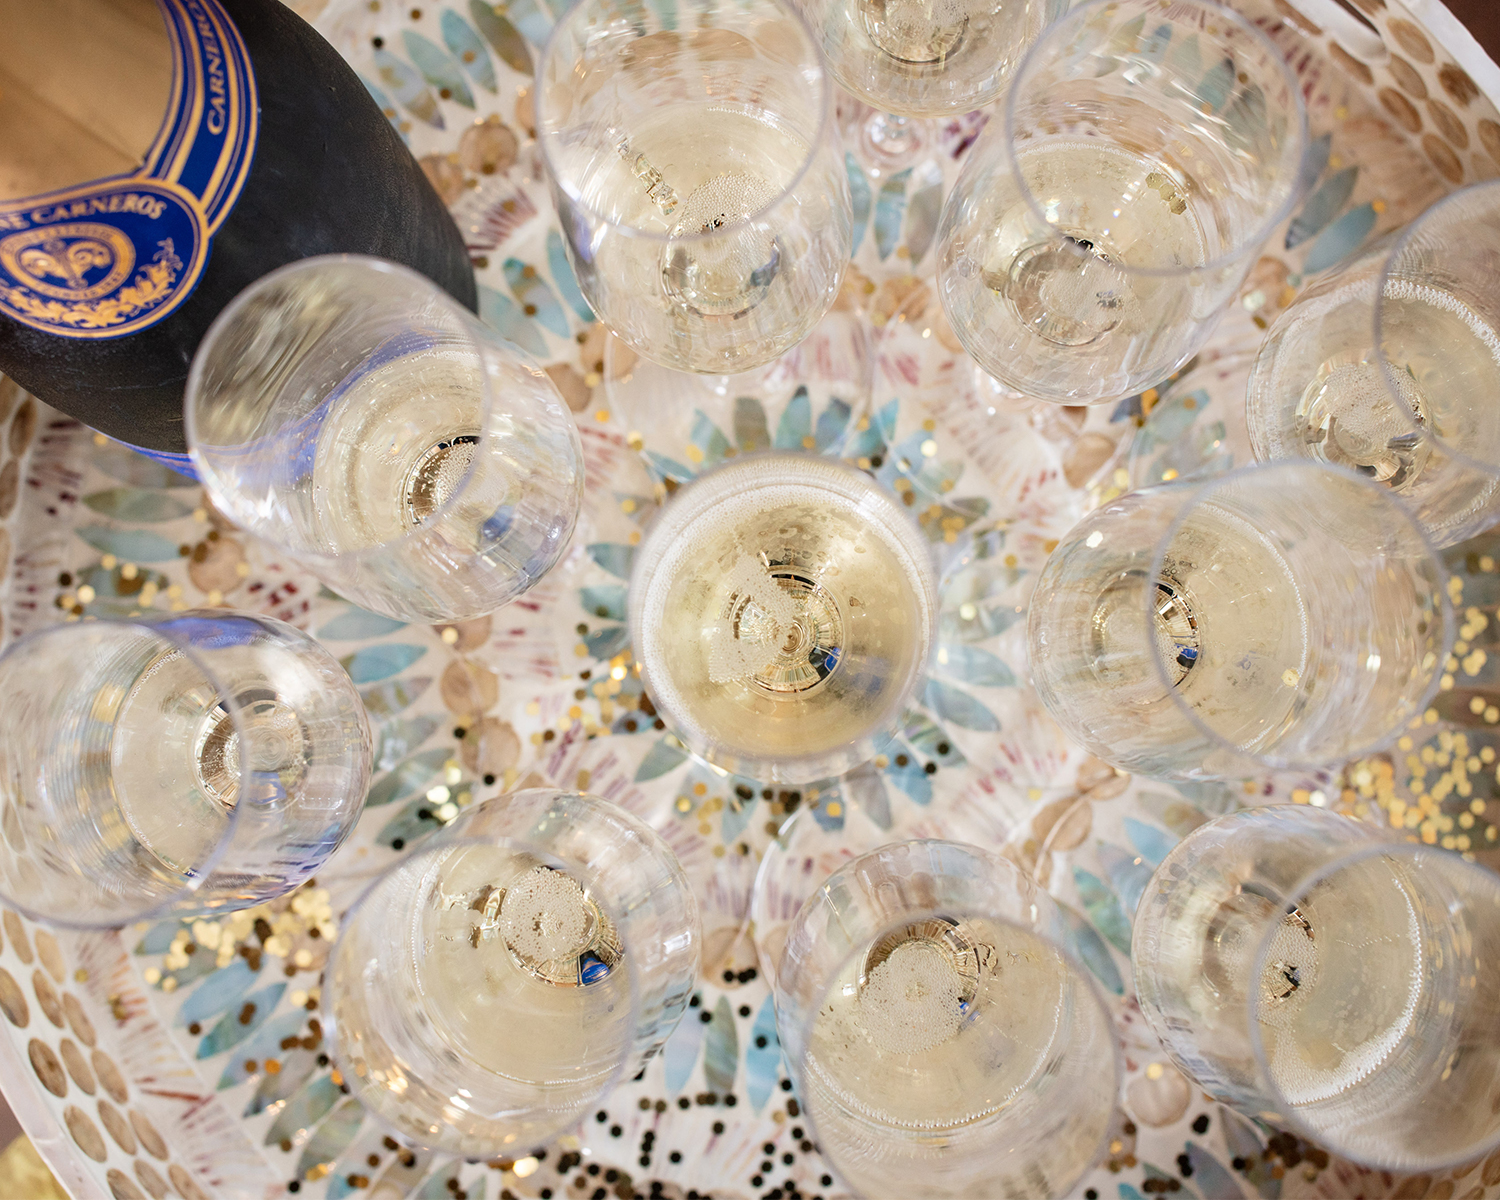 Tray of several glasses of bubbles with gold glitter